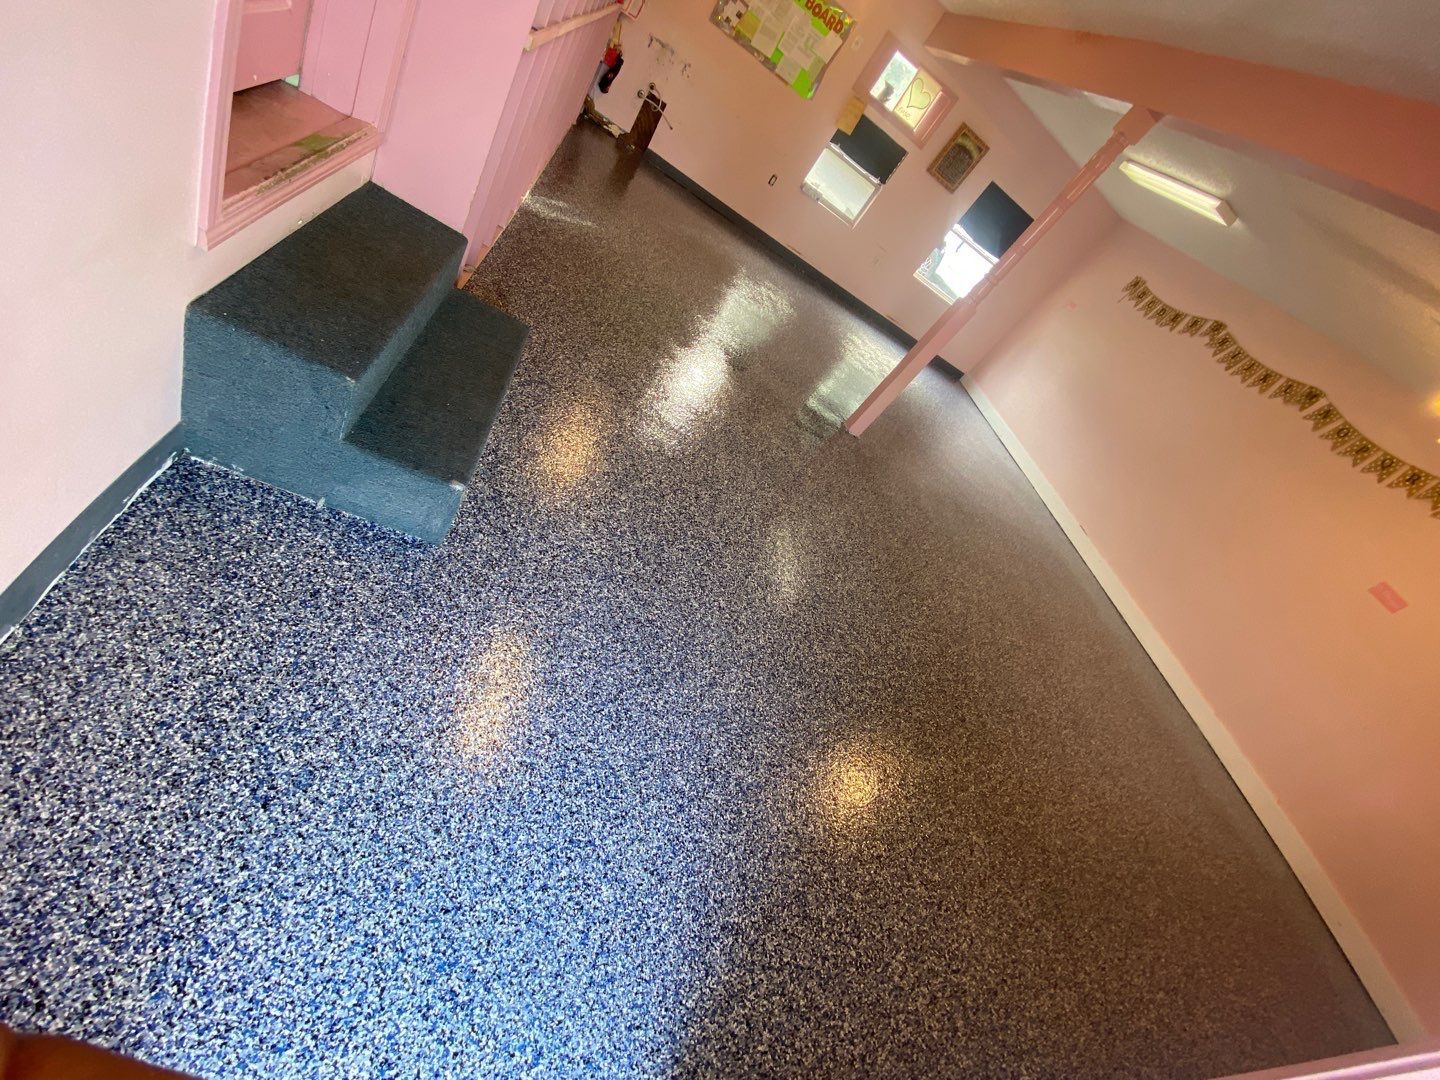 Room in childcare facility with new concrete coating on floor